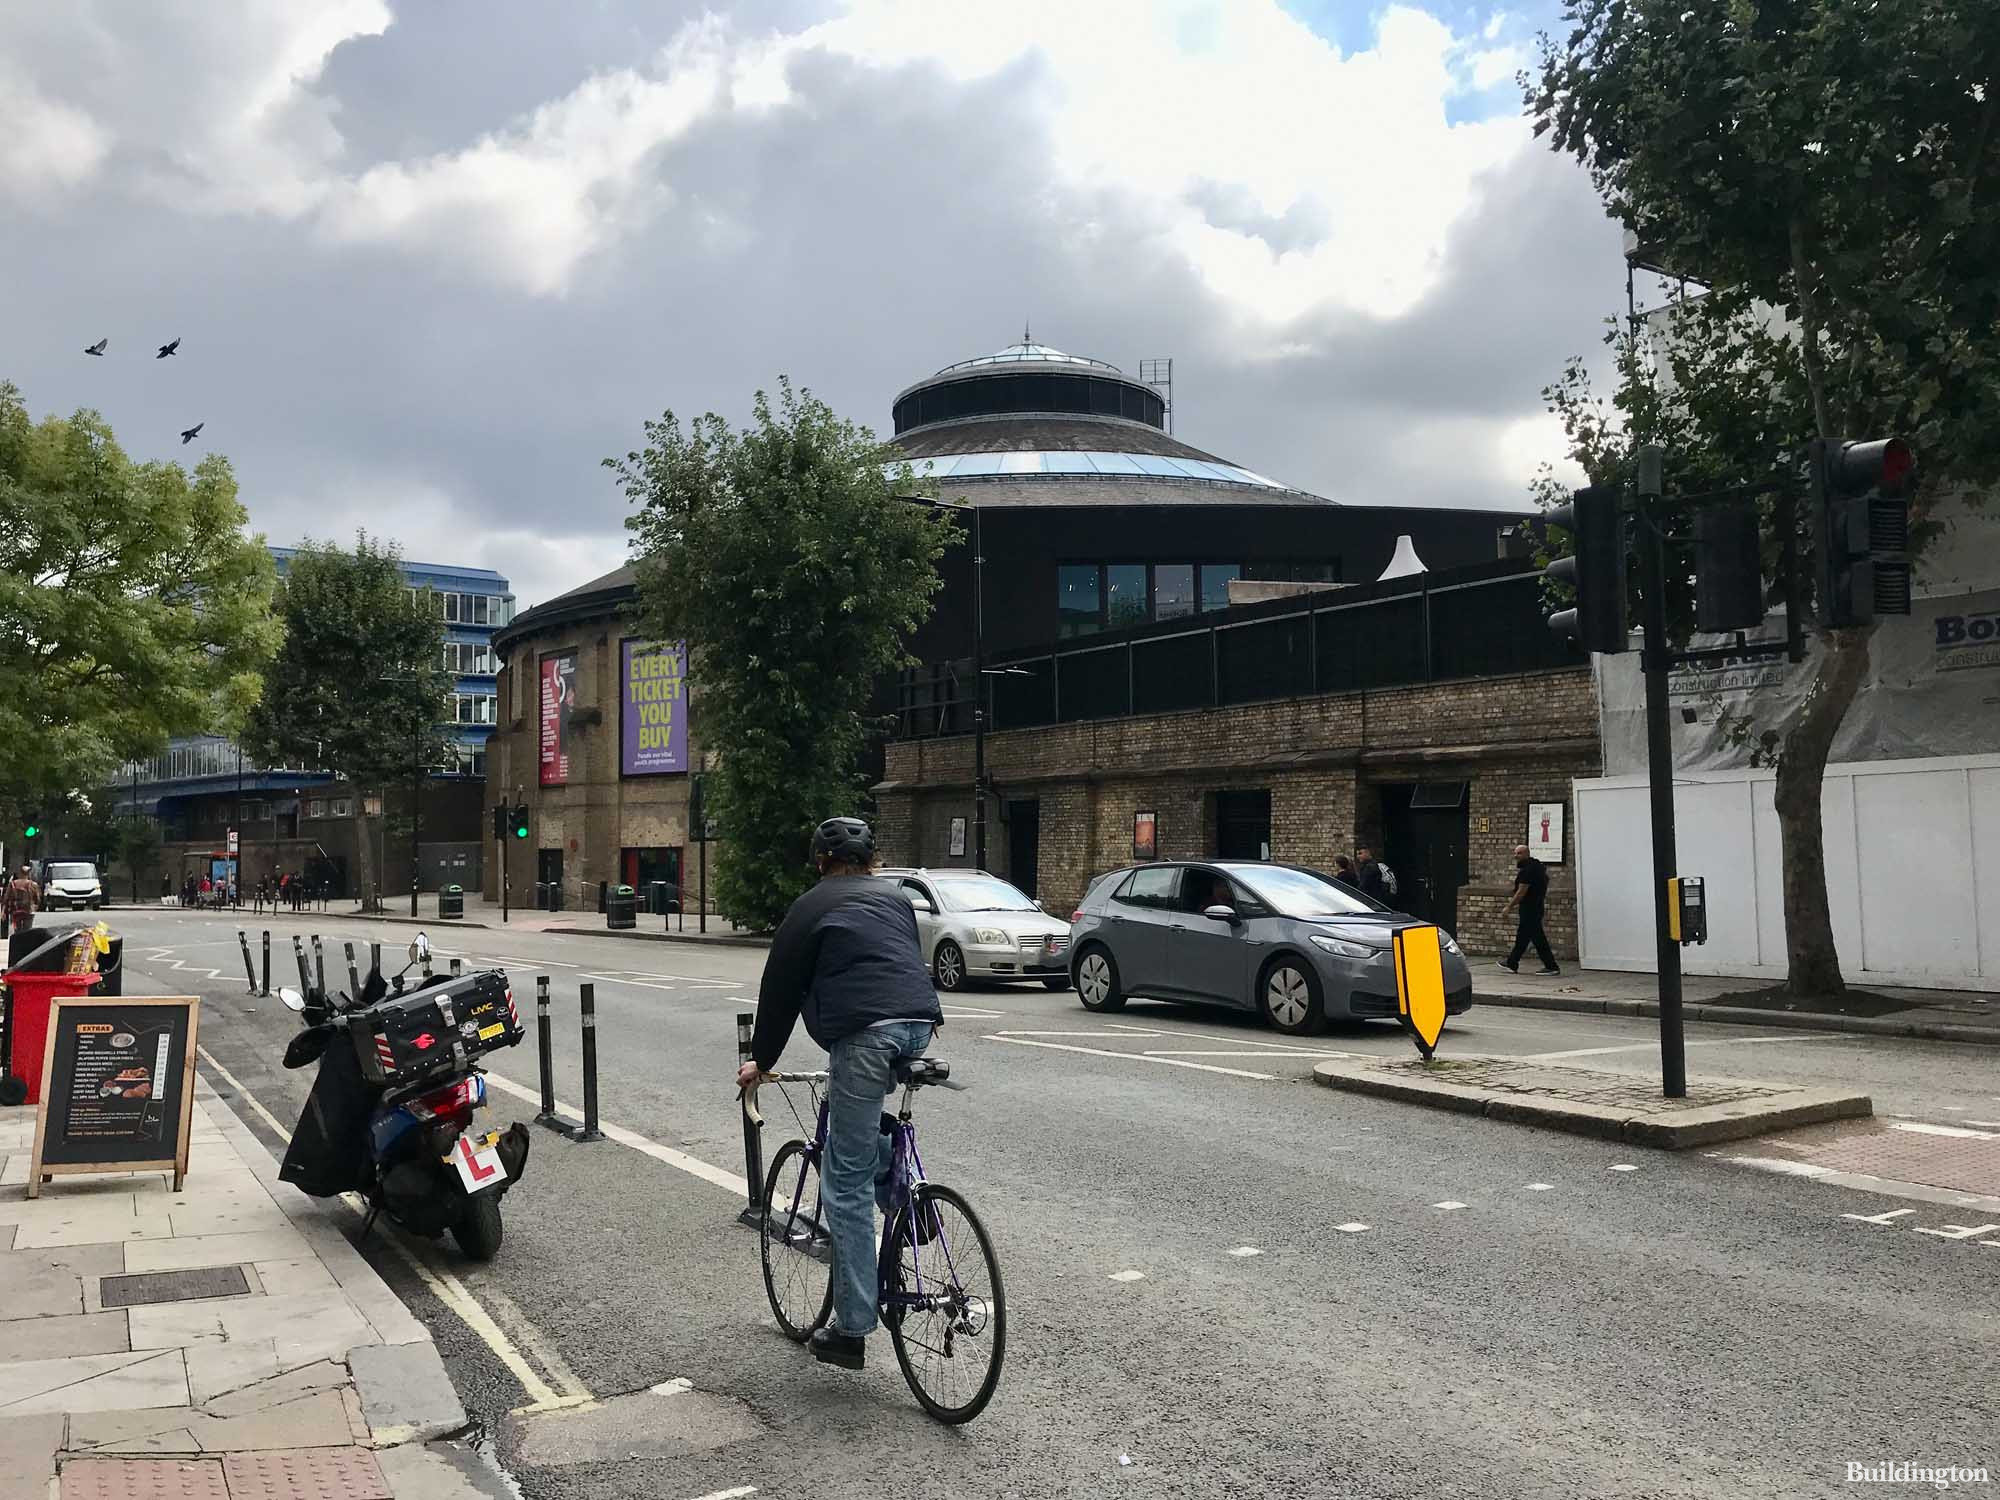 The Roundhouse on Chalk Farm Road